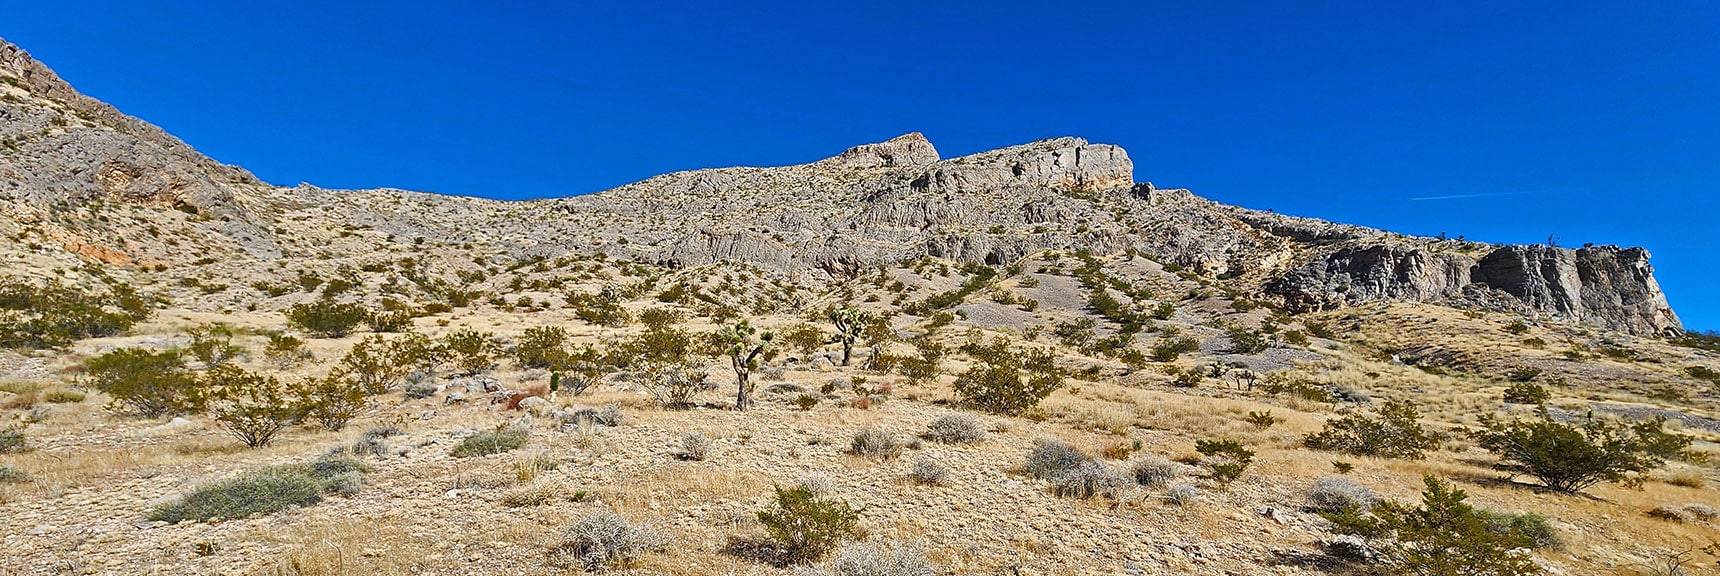 Potential Summit Approach Near Southwest Edge. High Point Above Achieved Today from Other Side | Landmark Bluff | Lovell Canyon, Nevada